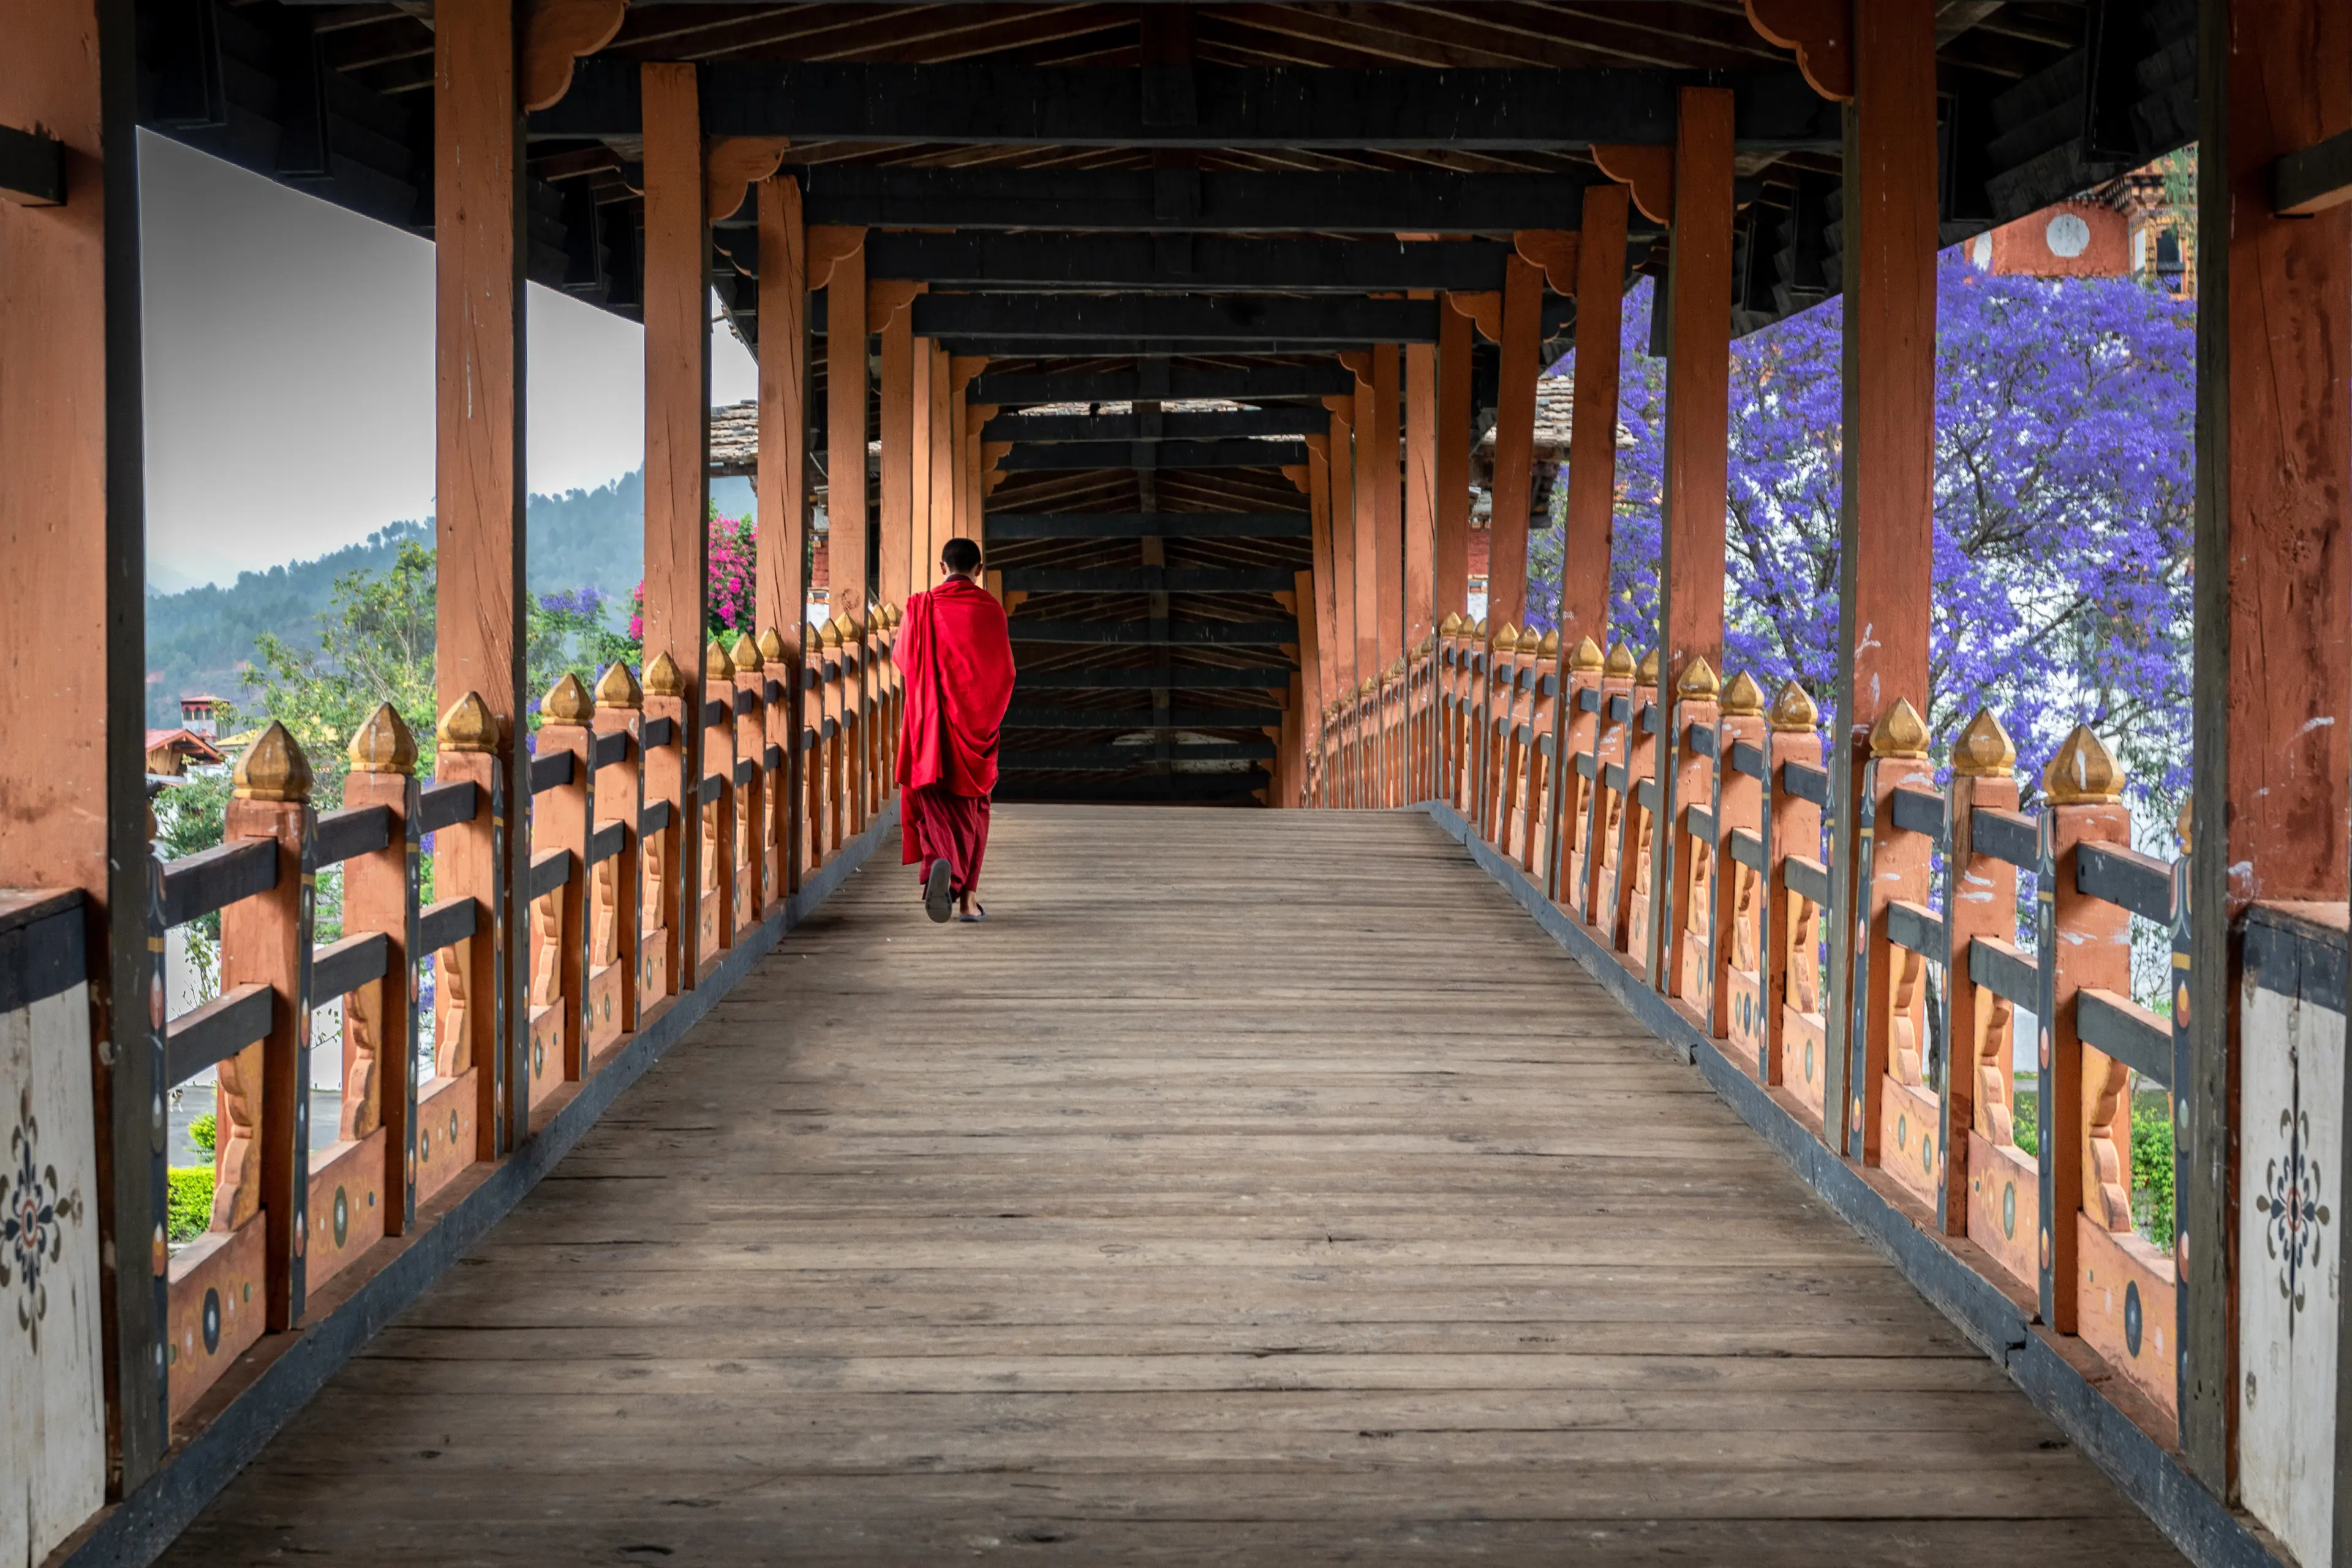 A monk dressed in a red robe walking around Punakha Dzong